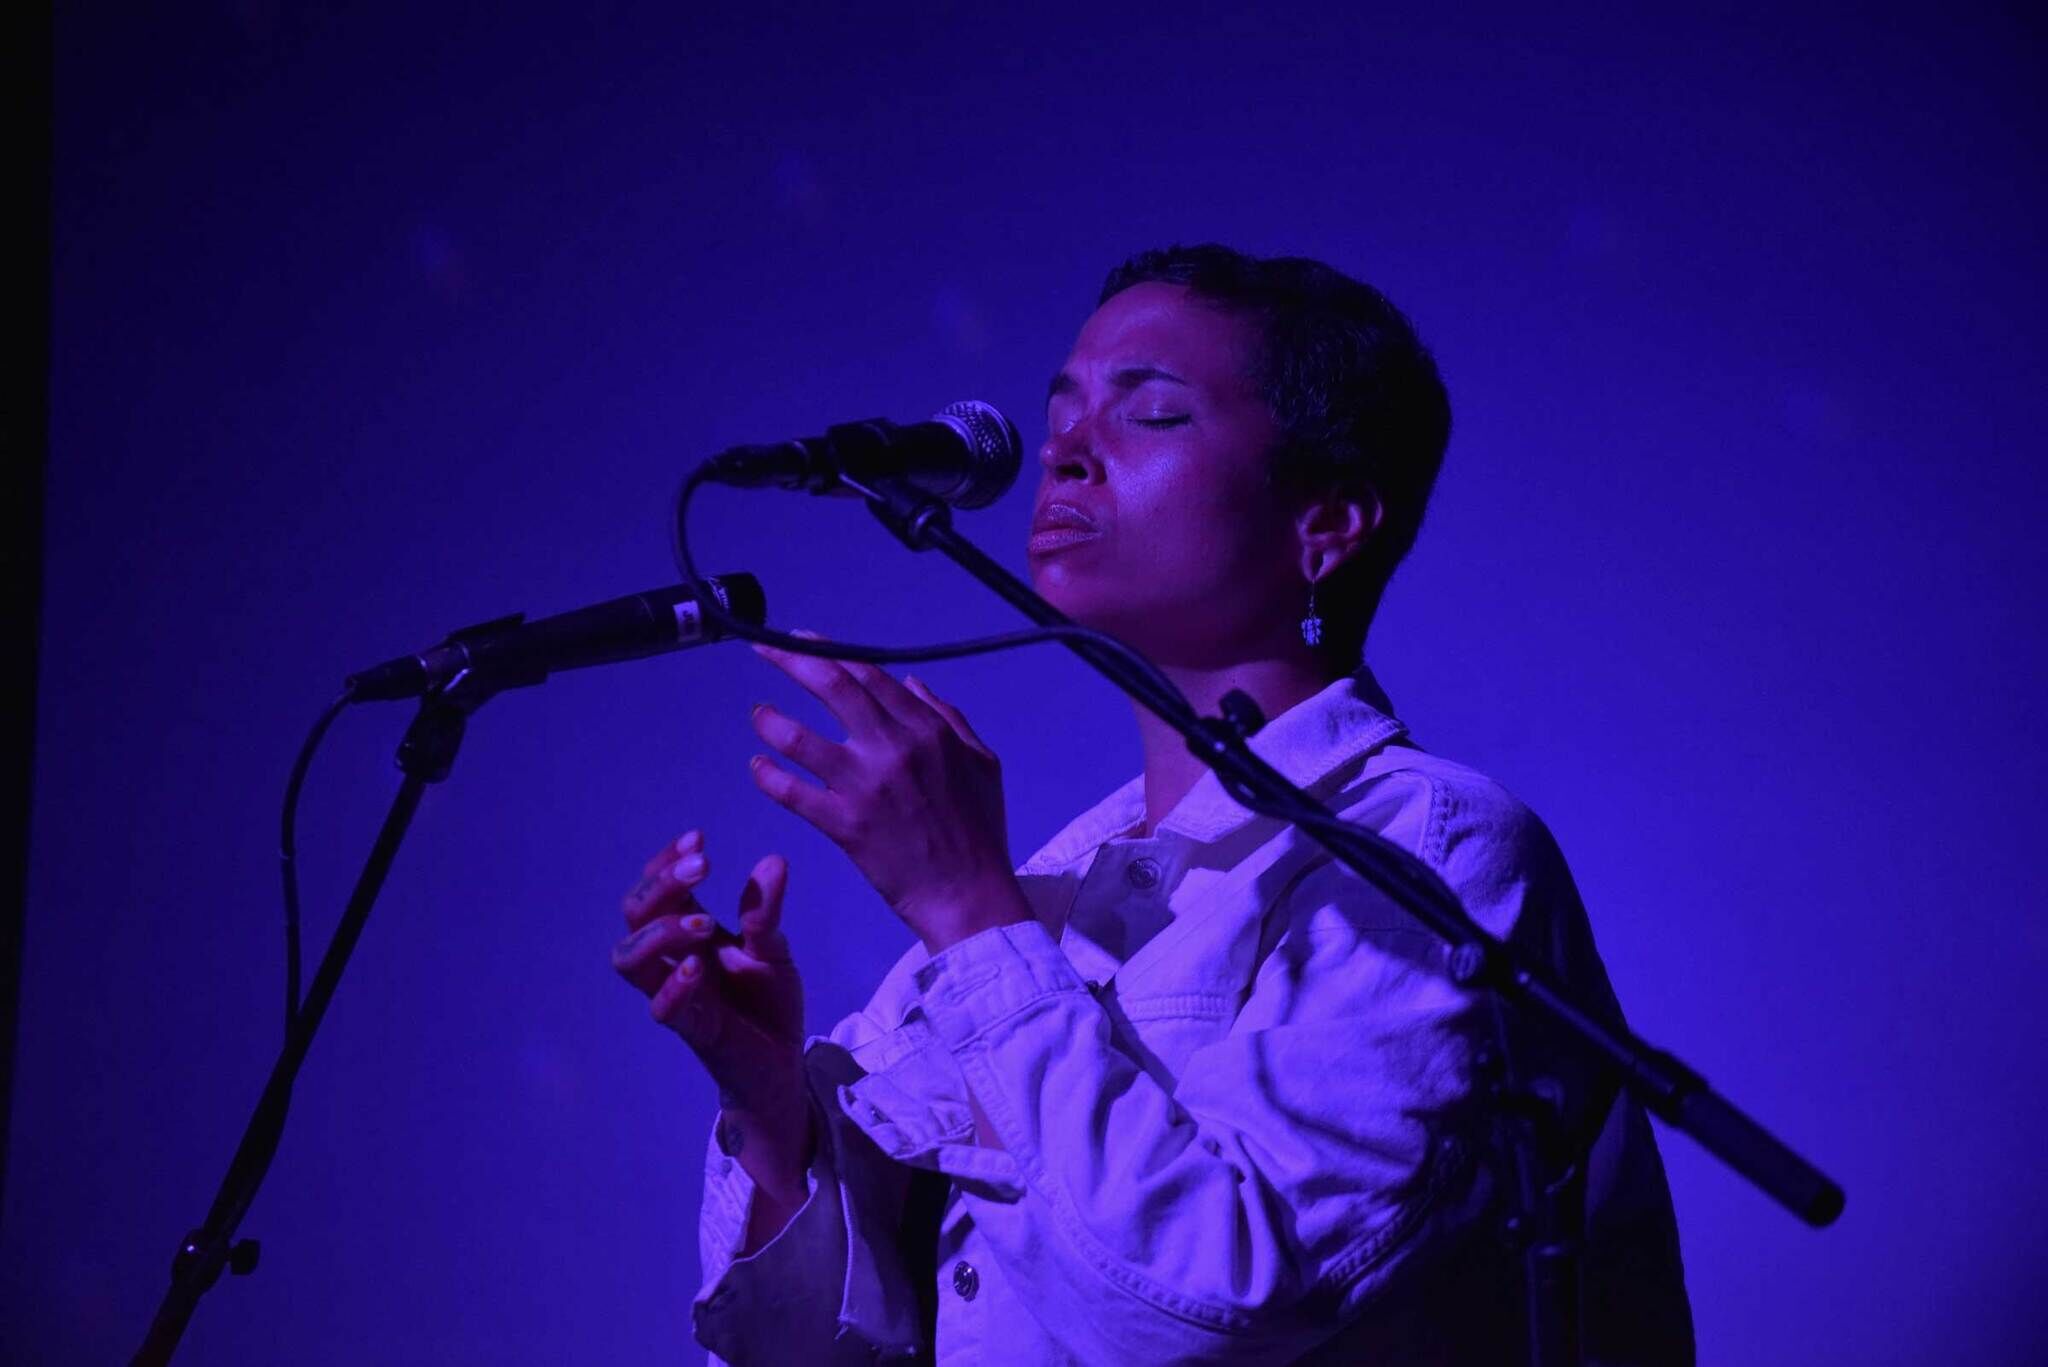 A singer performing on stage, bathed in blue light, eyes closed with emotion.